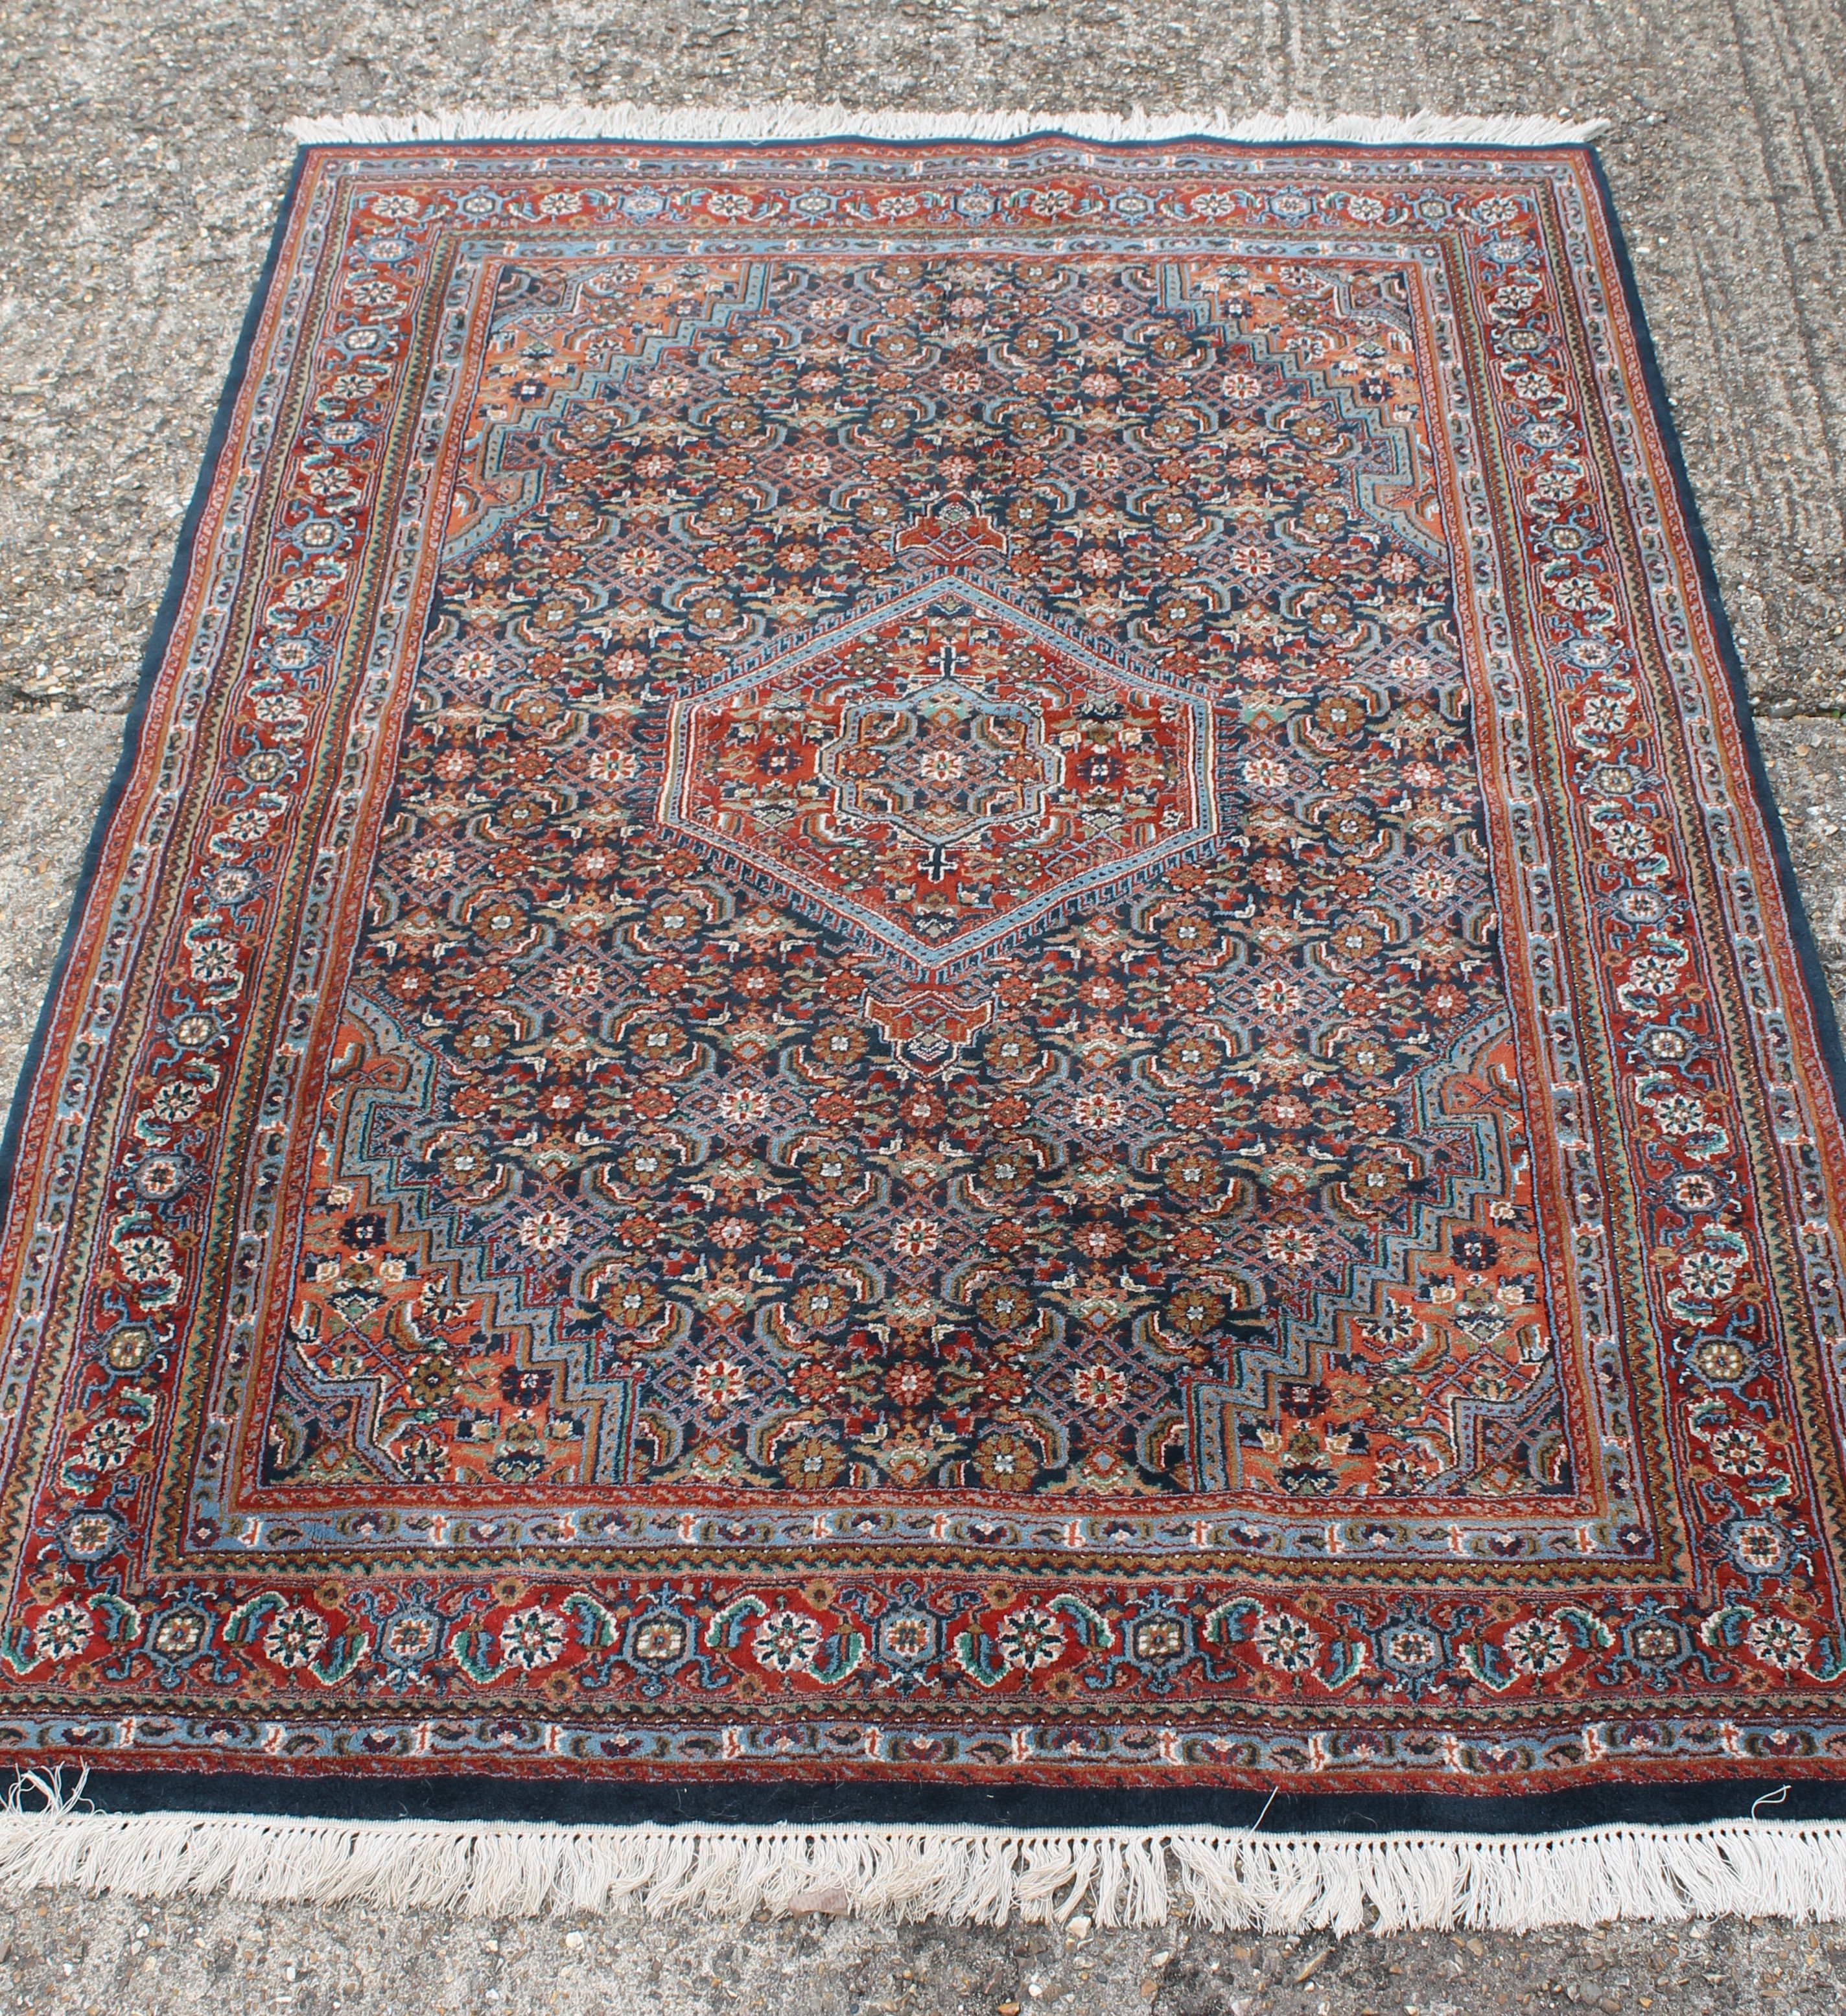 An Indian hand knotted wool rug. 233 x 169 cm.